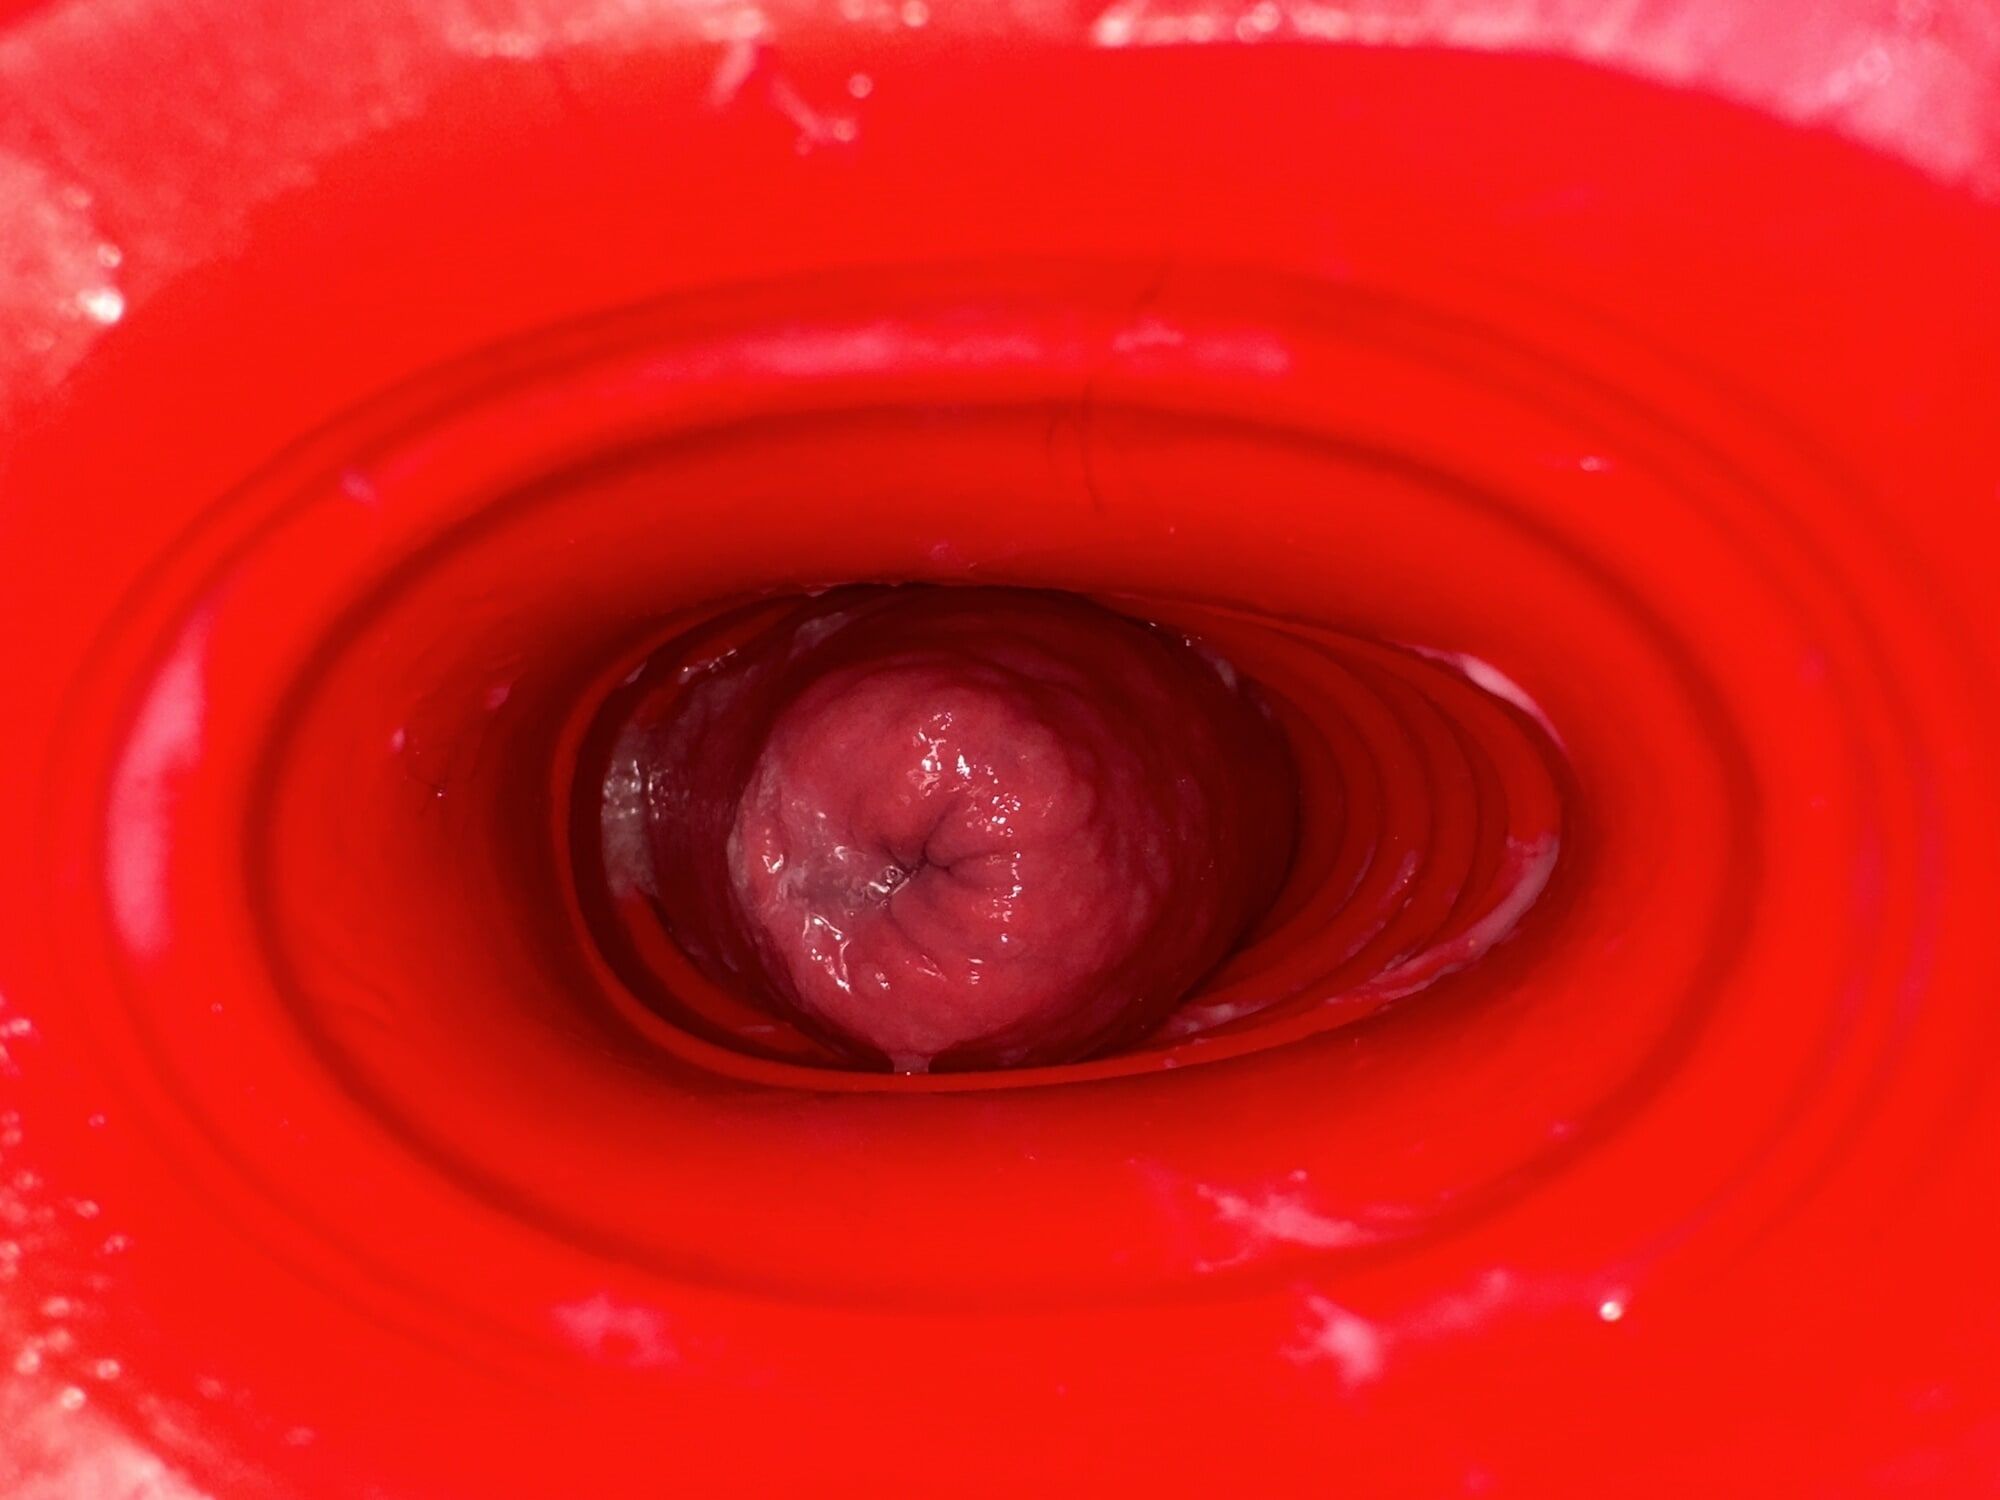 Anal prolapse in oxball ff pighole #6